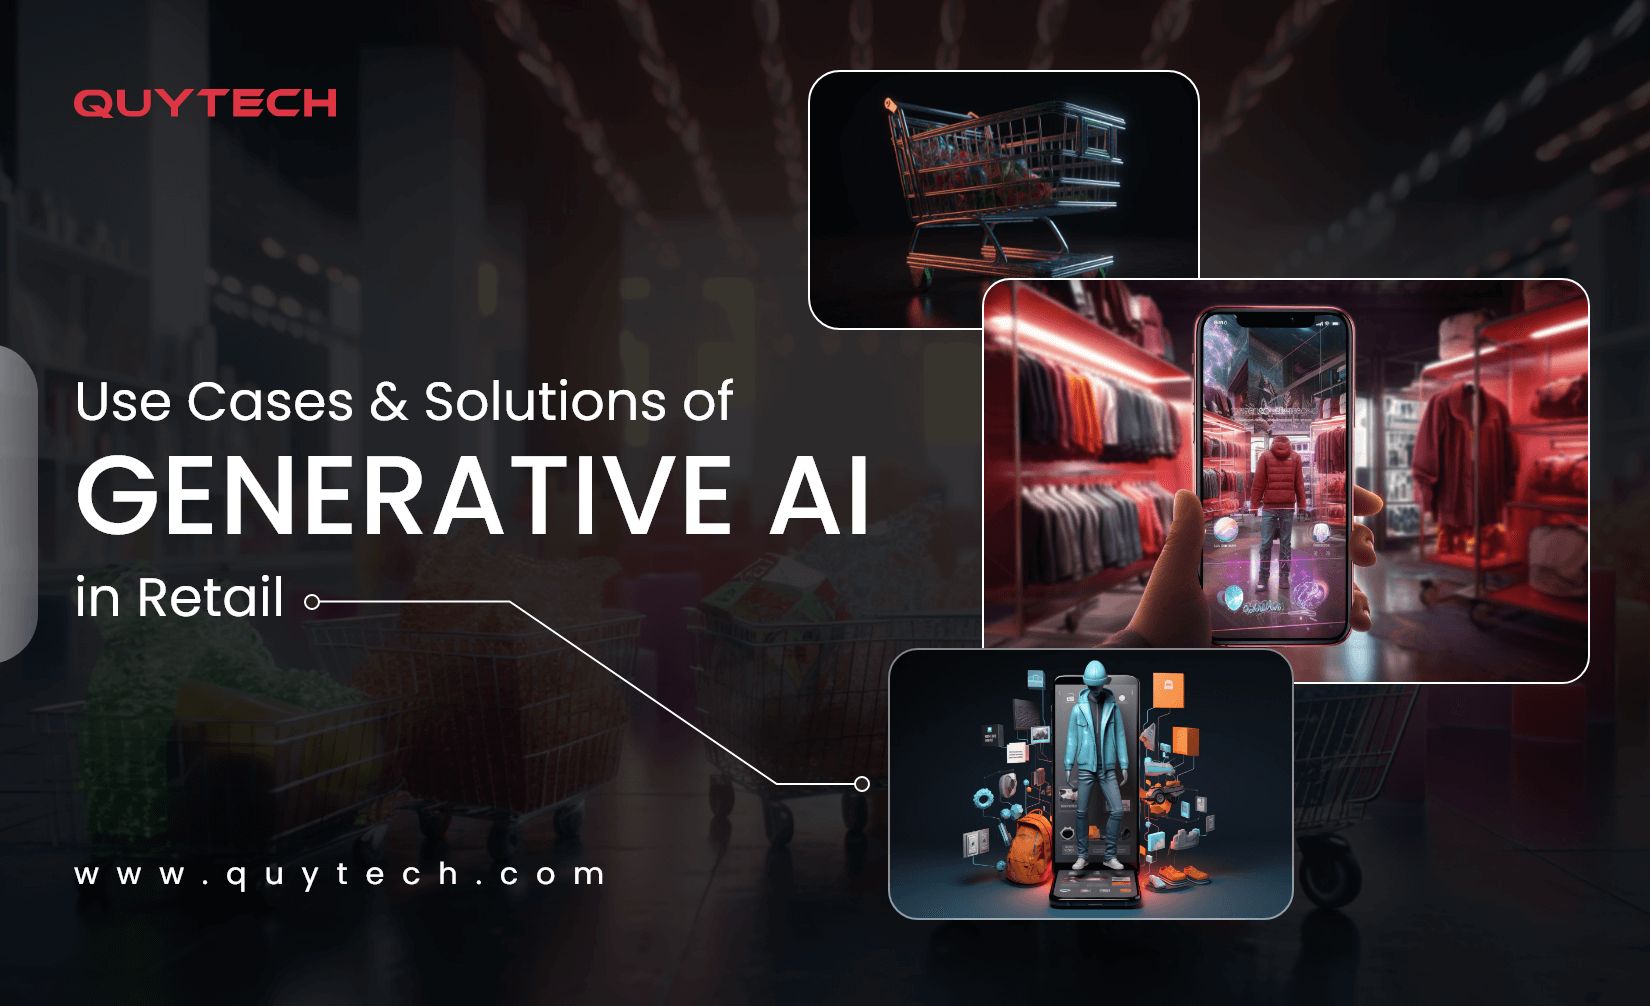 Use Cases & Solutions of Generative AI in Retail - Quytech Blog